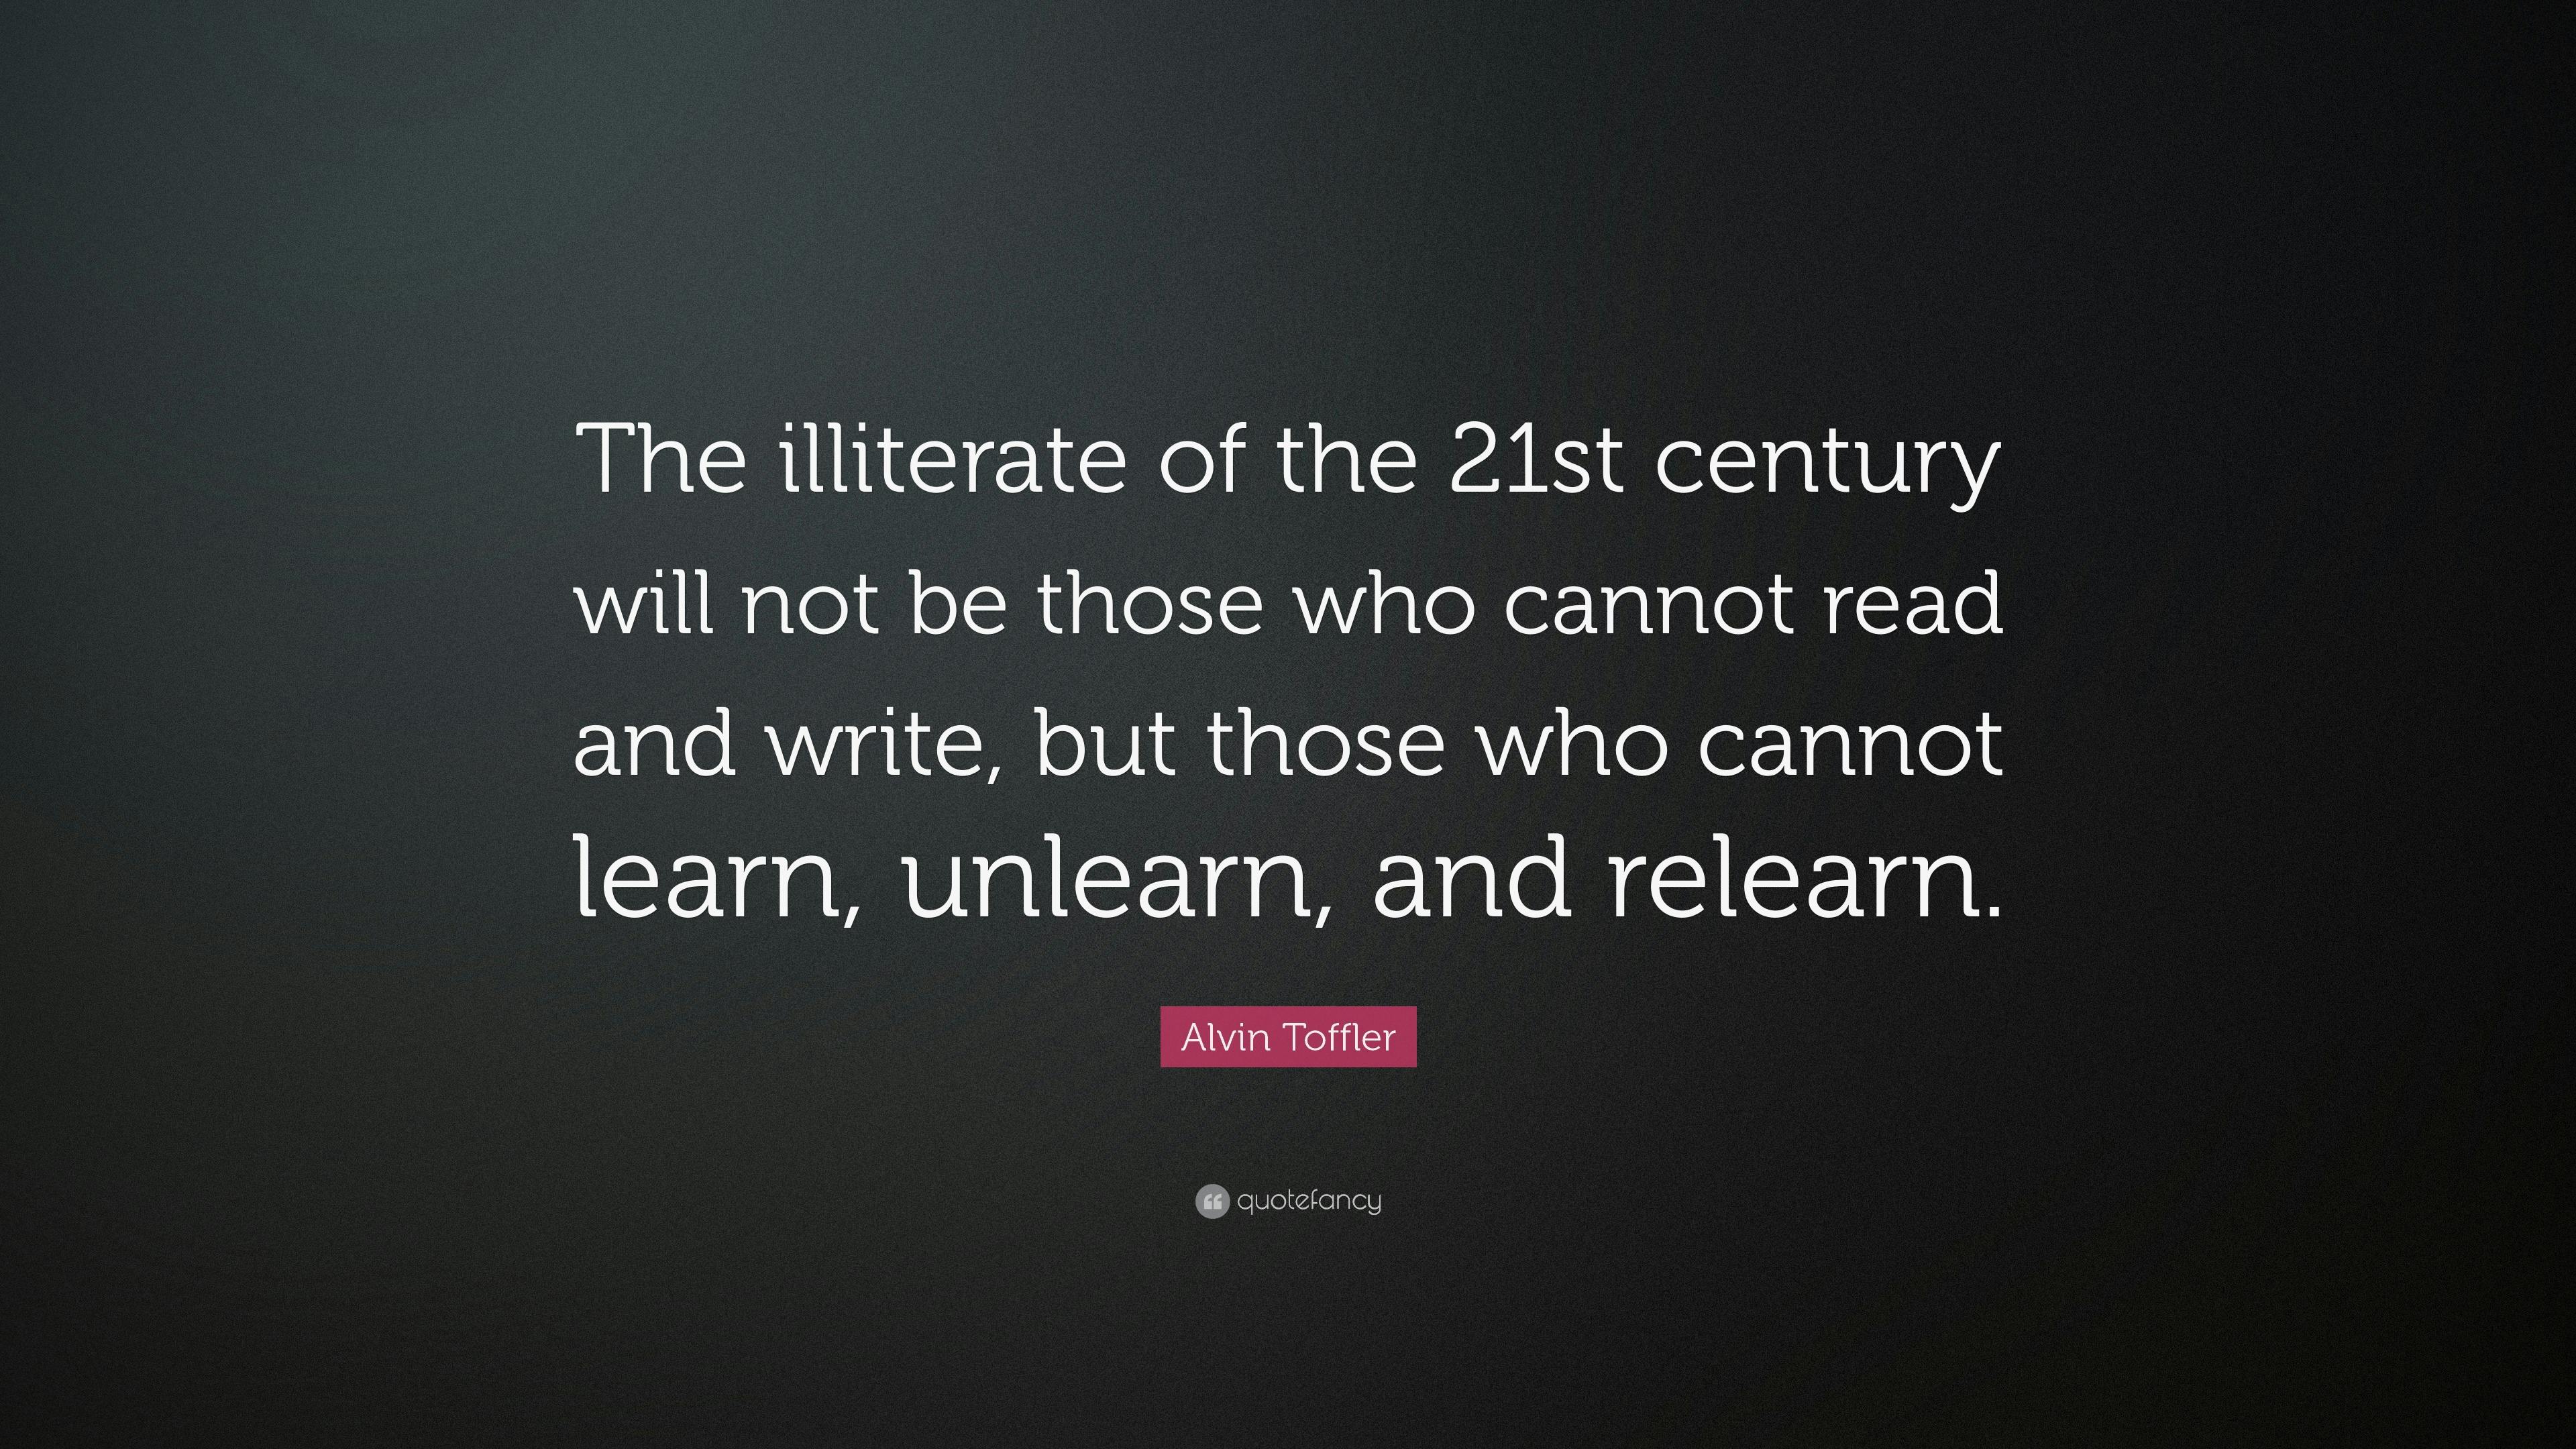 50088-Alvin-Toffler-Quote-The-illiterate-of-the-21st-century-will-not-be.jpg